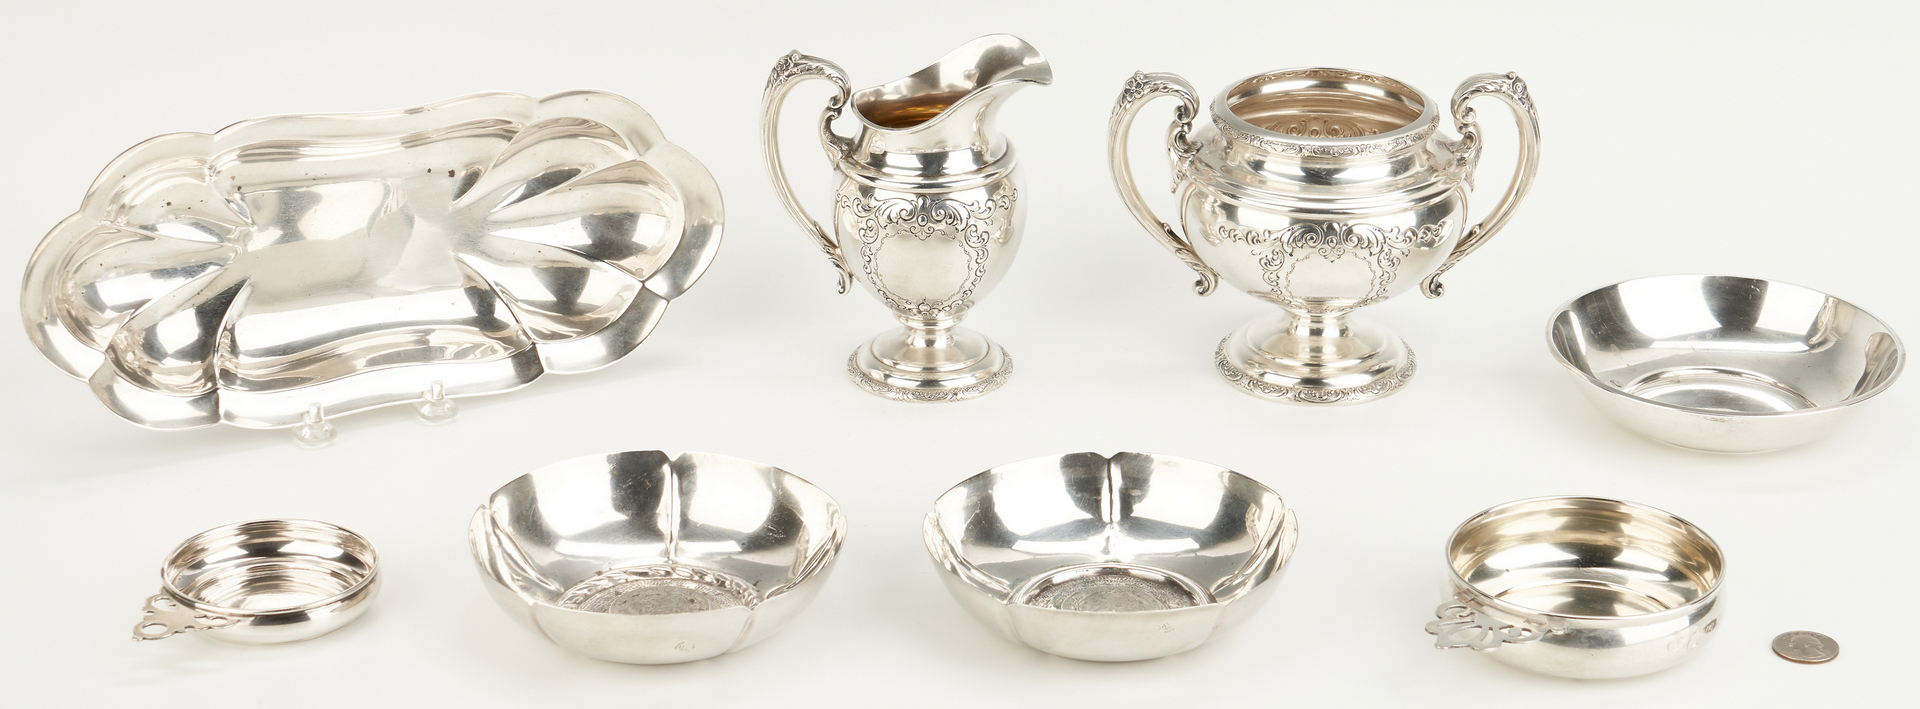 Lot 459: 8 Sterling Hollowware Items incl. coin-inset bowls